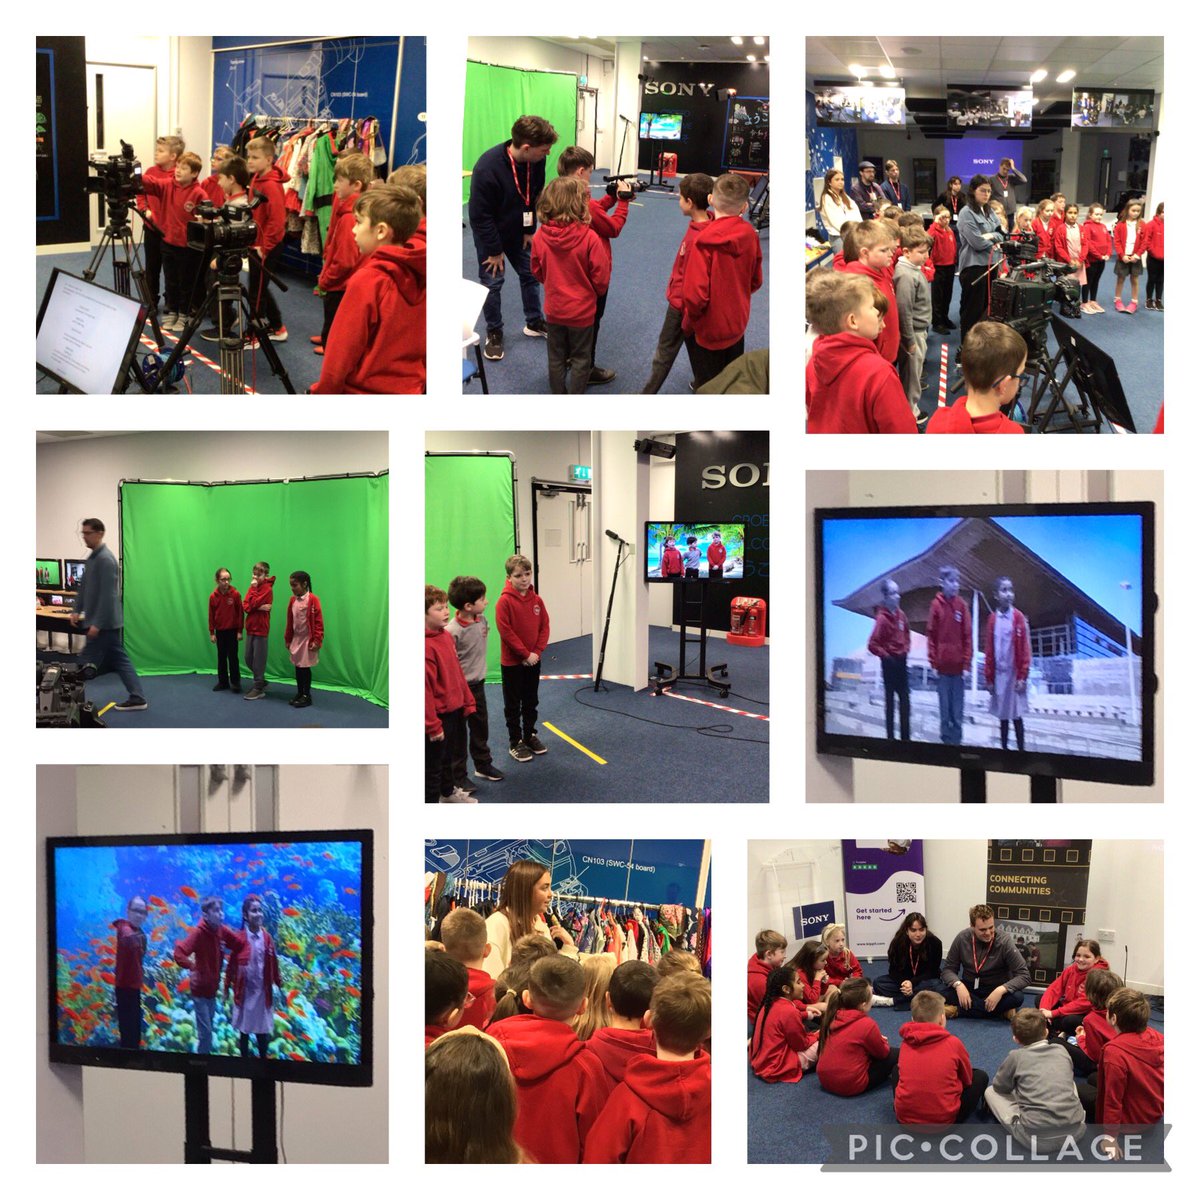 #DosbarthMarlas had a fantastic time working on producing a short film with Sony today. They learnt how to use green screen technology, cameras, props, costumes and much more. It was am amazing experience. #YGTLLC #YGTEXP #YGTSAT #YGTCL #YGTECC